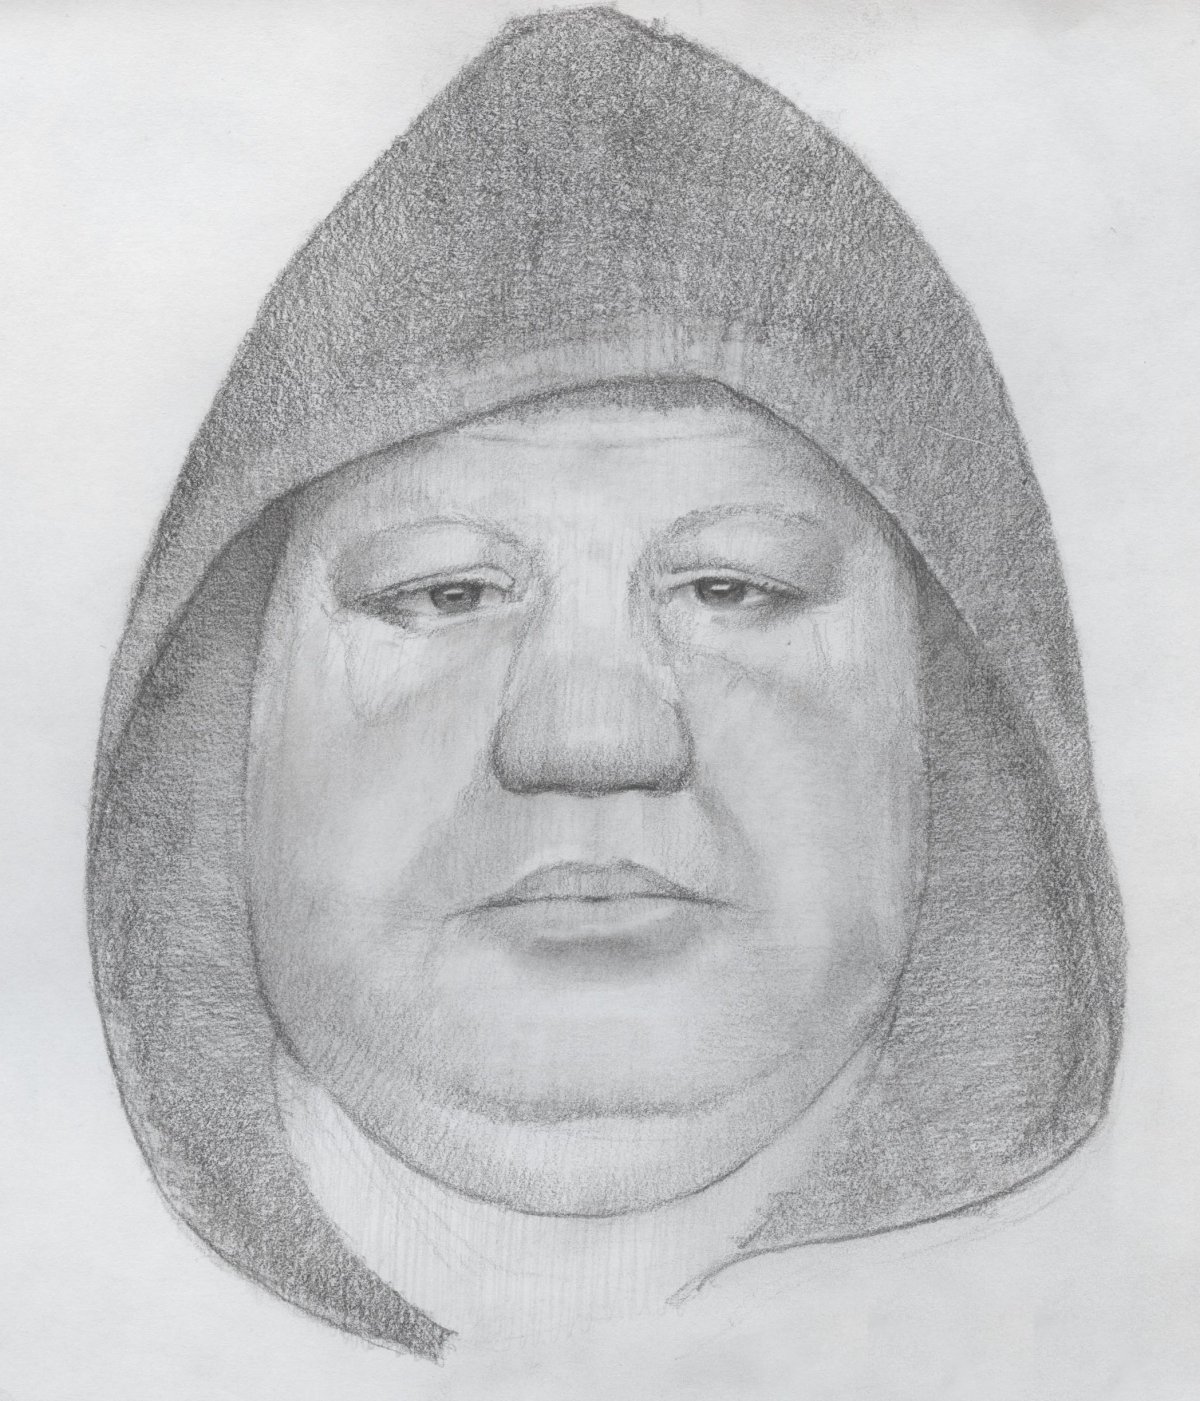 Vancouver police are hoping someone knows this man and comes forward.